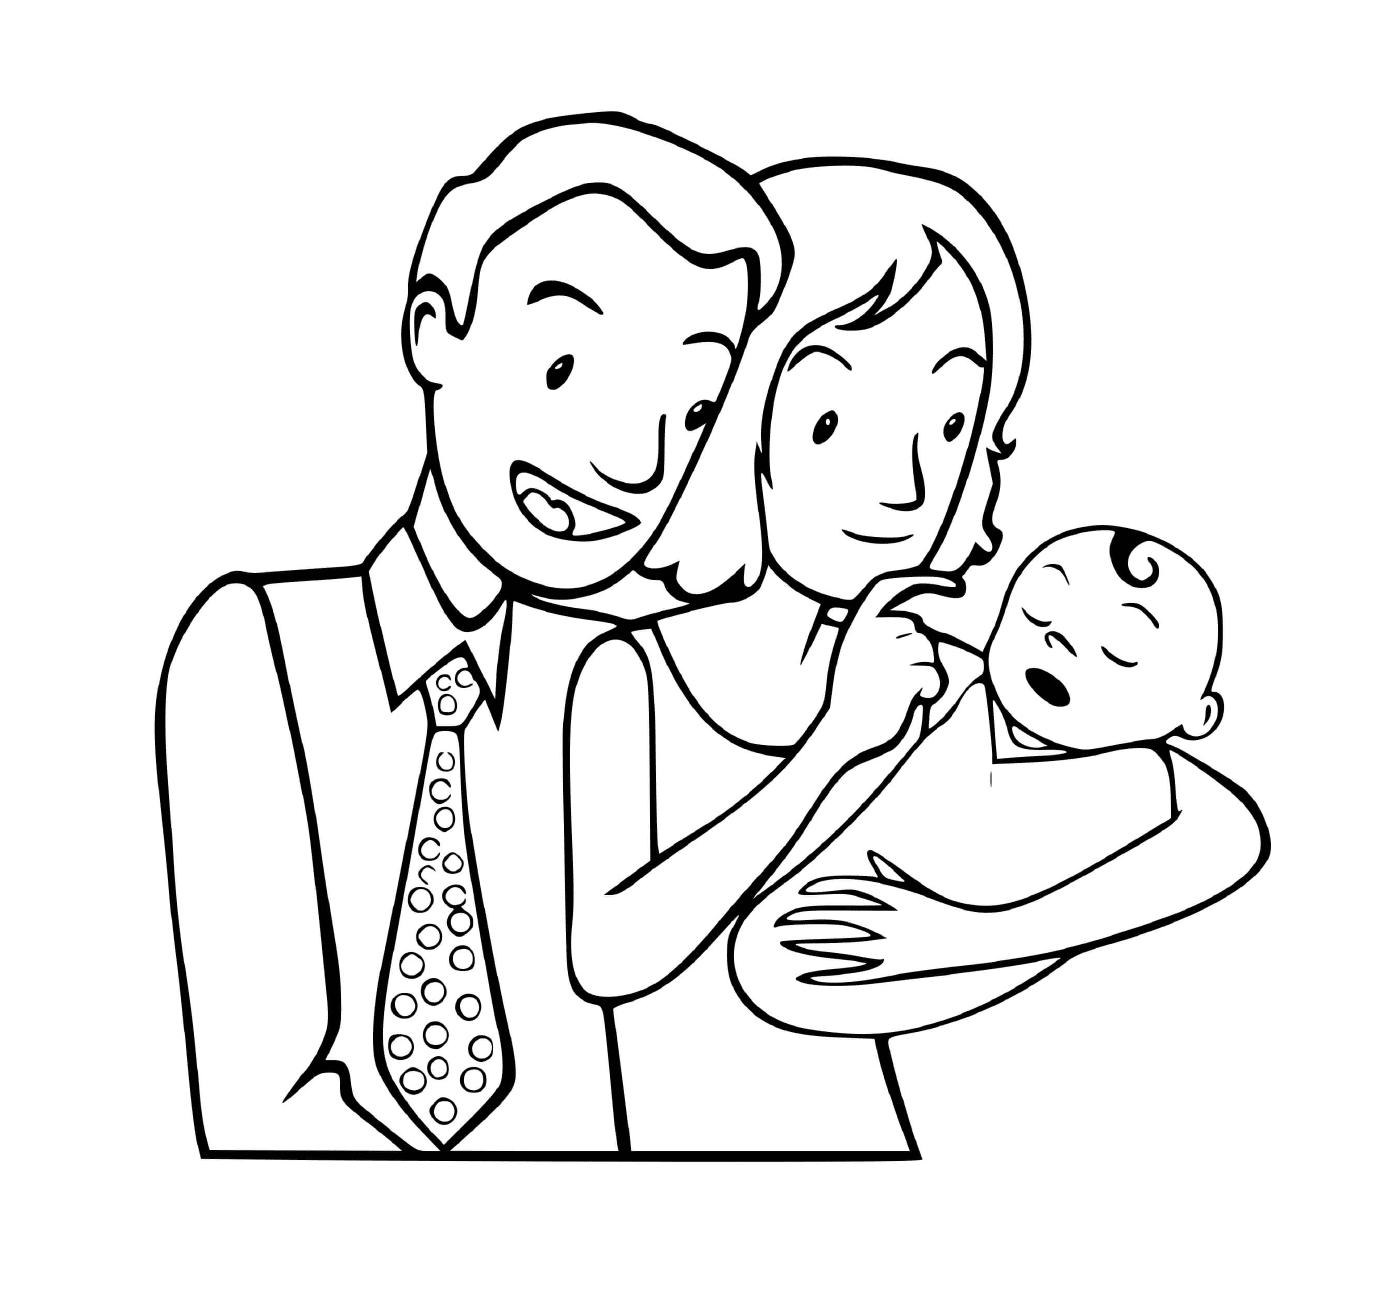  A small family with a newborn 